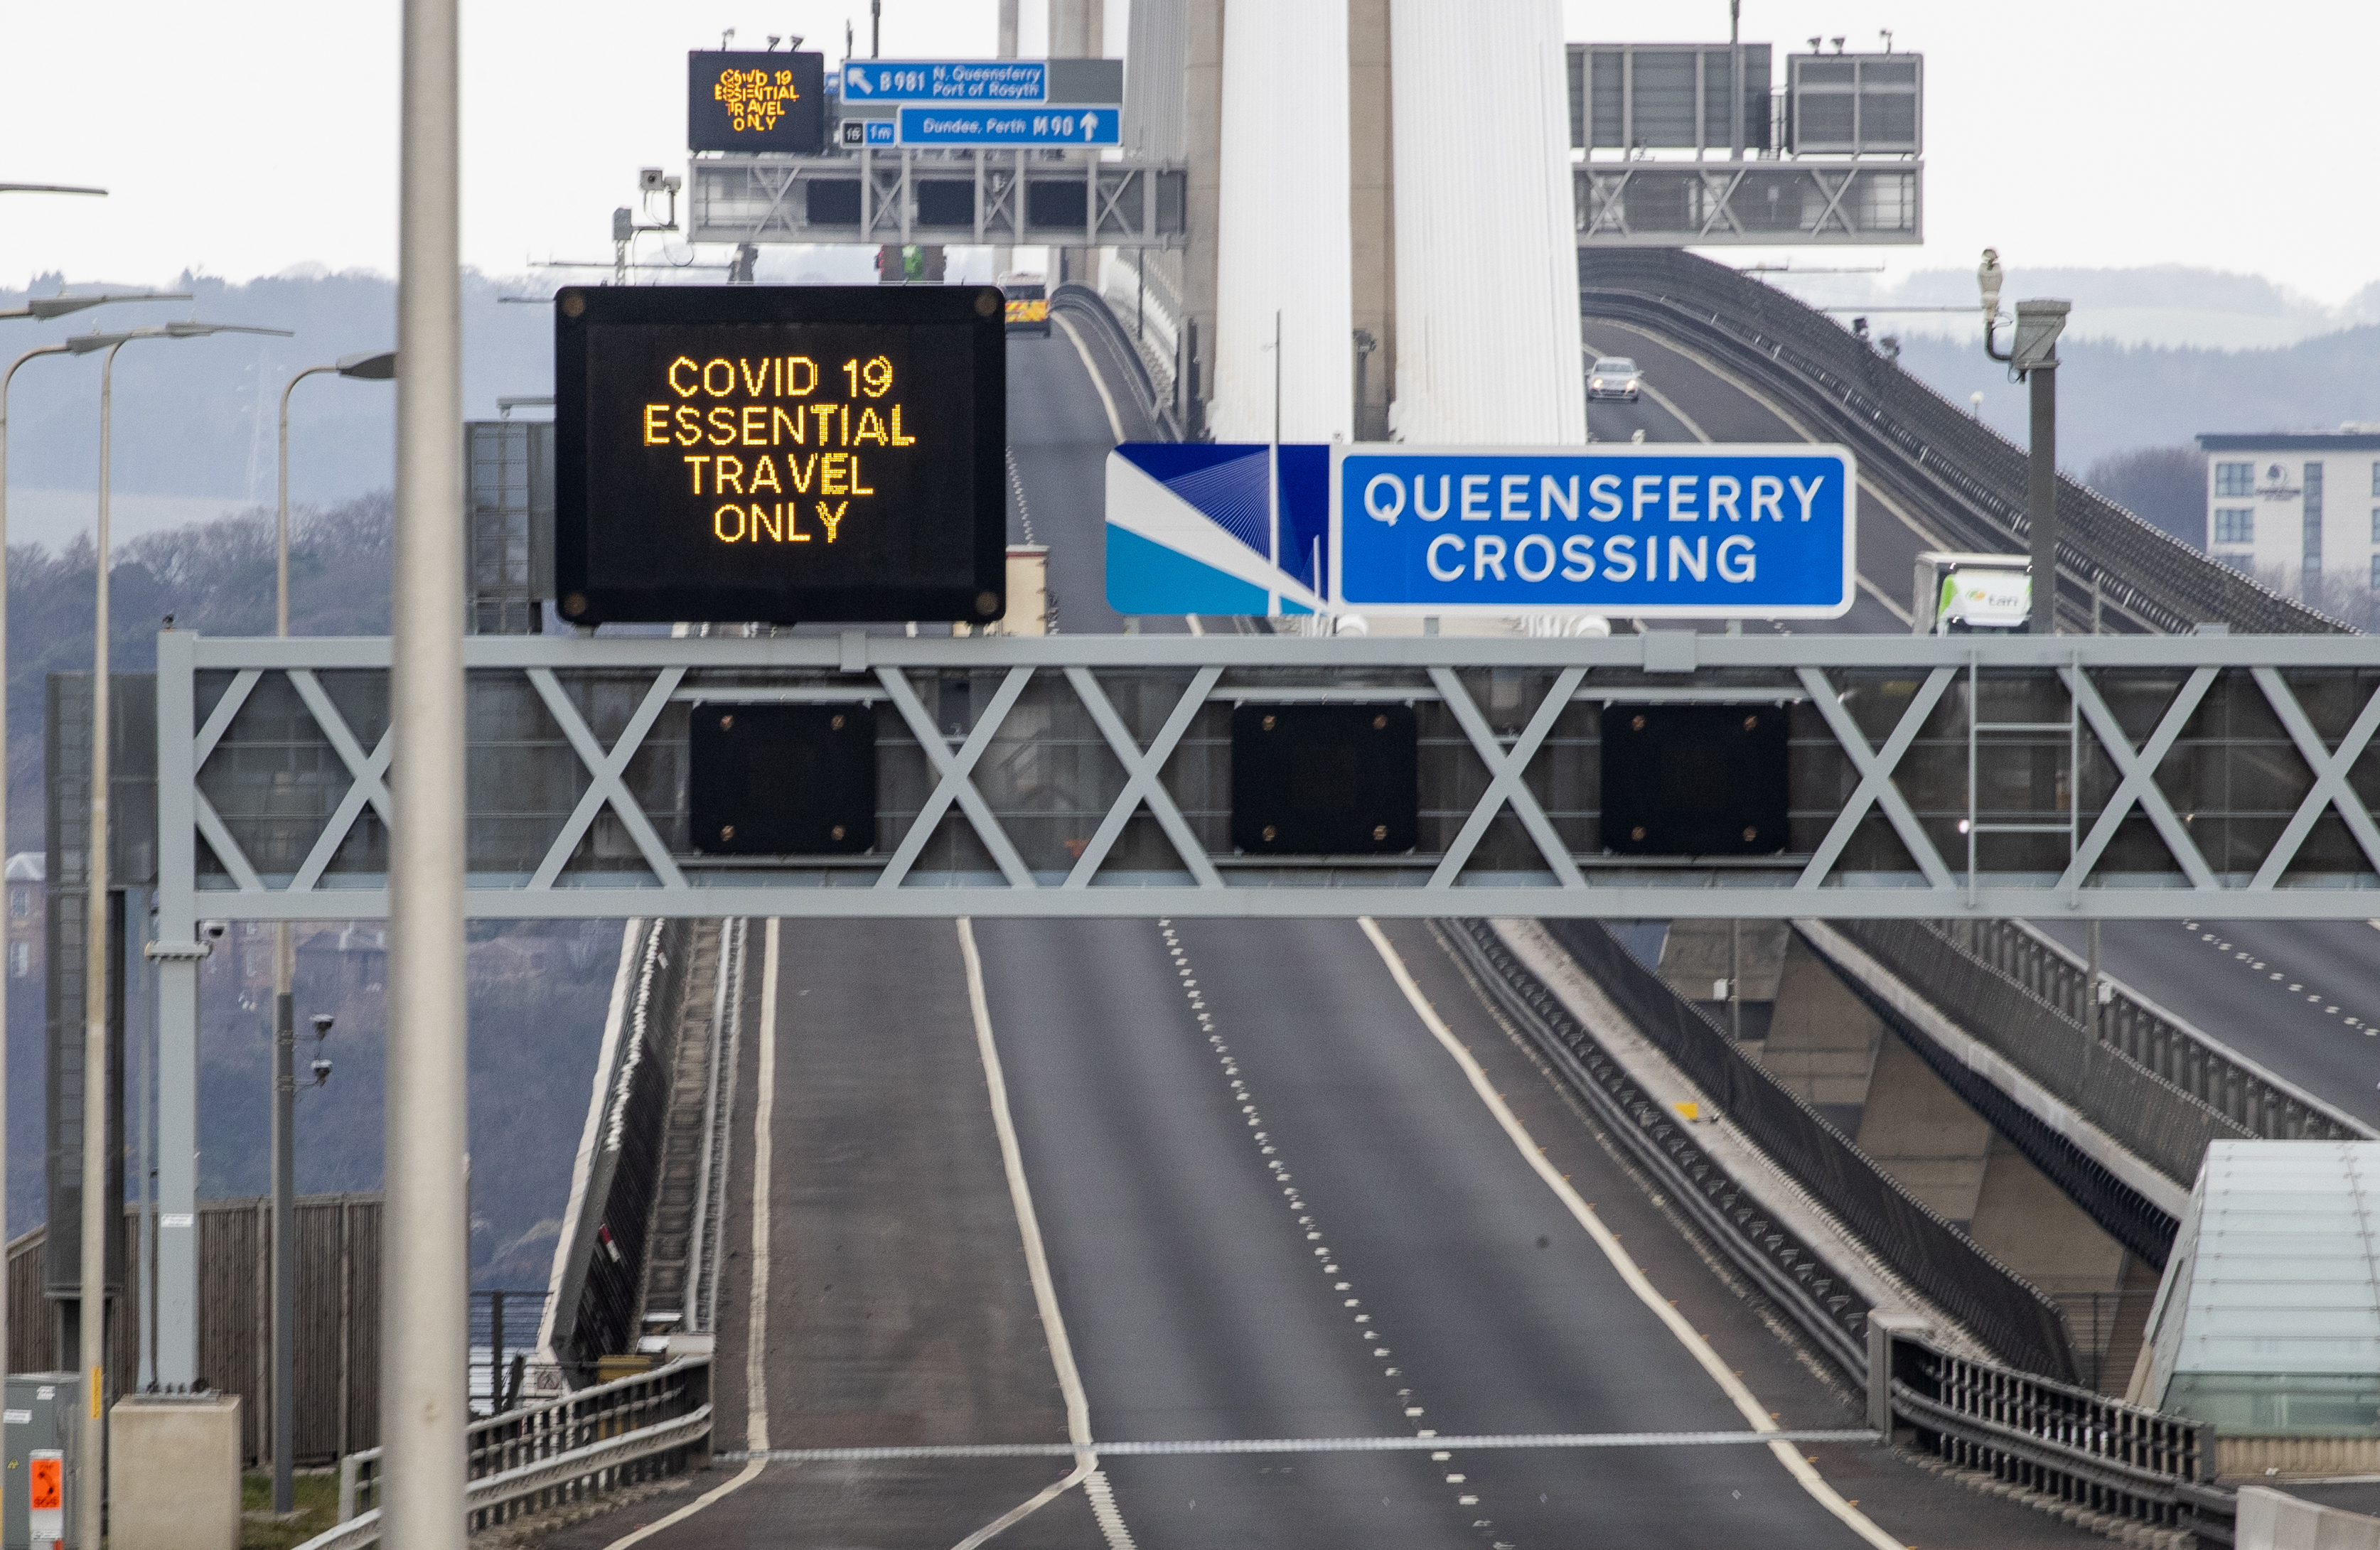 Information signs advise people to take essential travel only on the Queensferry Crossing, near Edinburgh, after Prime Minister Boris Johnson has put the UK in lockdown to help curb the spread of the coronavirus.